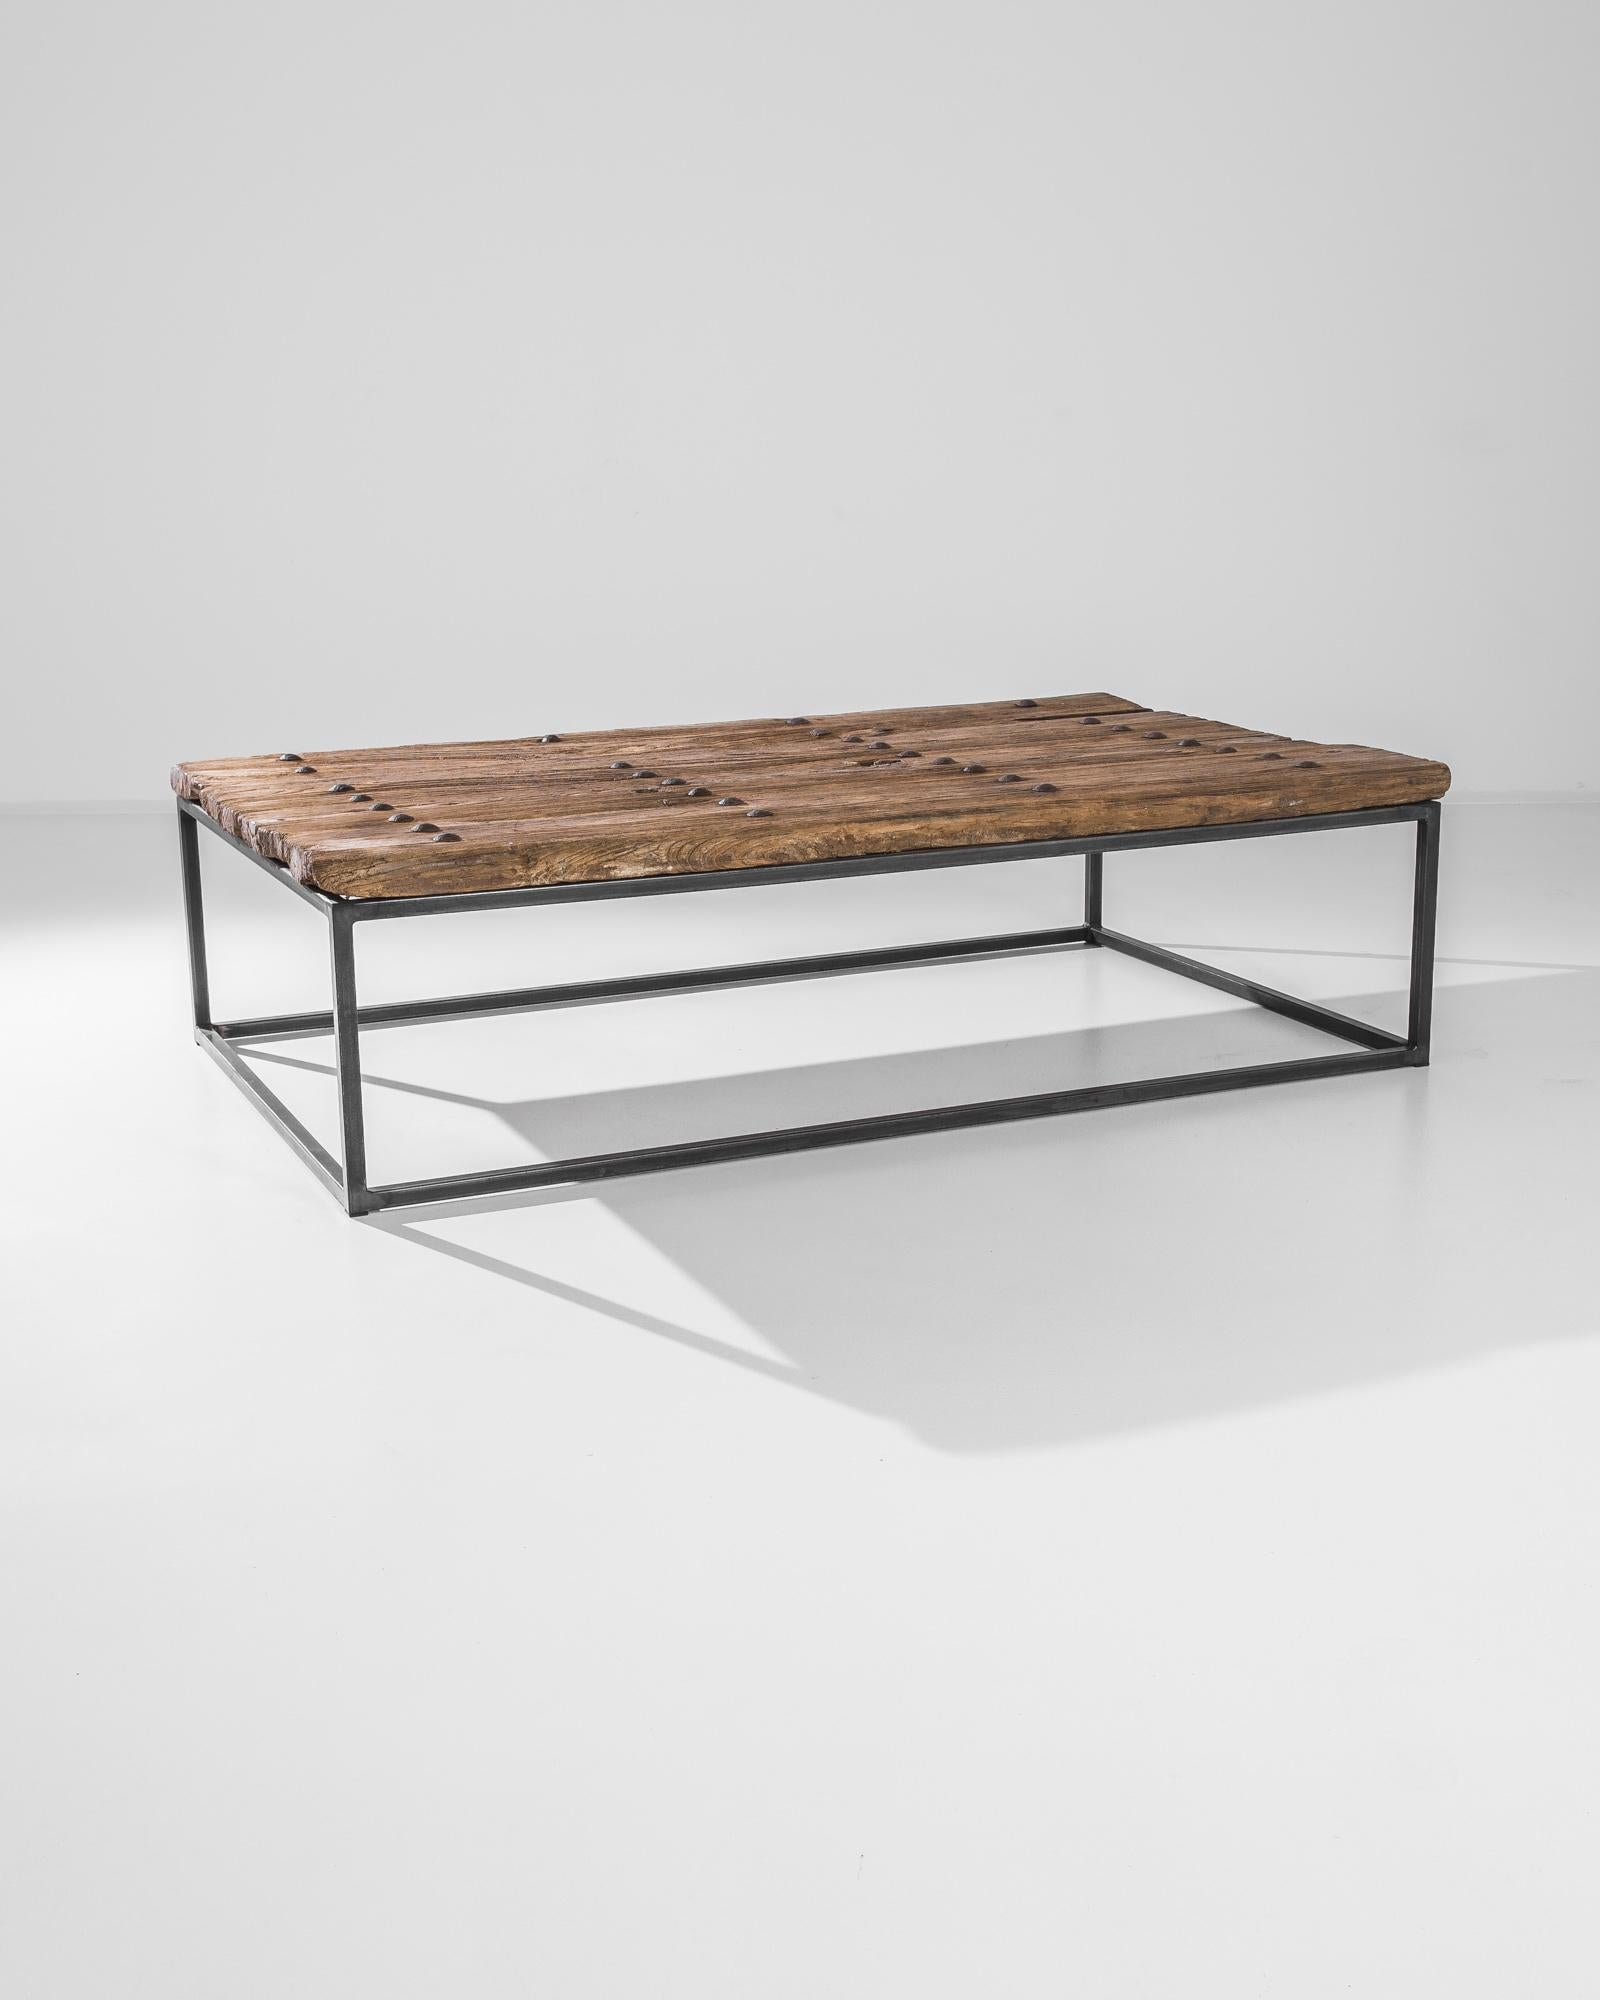 A wooden and metal door from China, circa 1900, rests on a steel base. Blending sleek and rustic, this 17.7” tall coffee table makes a comfortable and stylish place to rest your drink. A simple symmetry sings in this handcrafted table featuring a